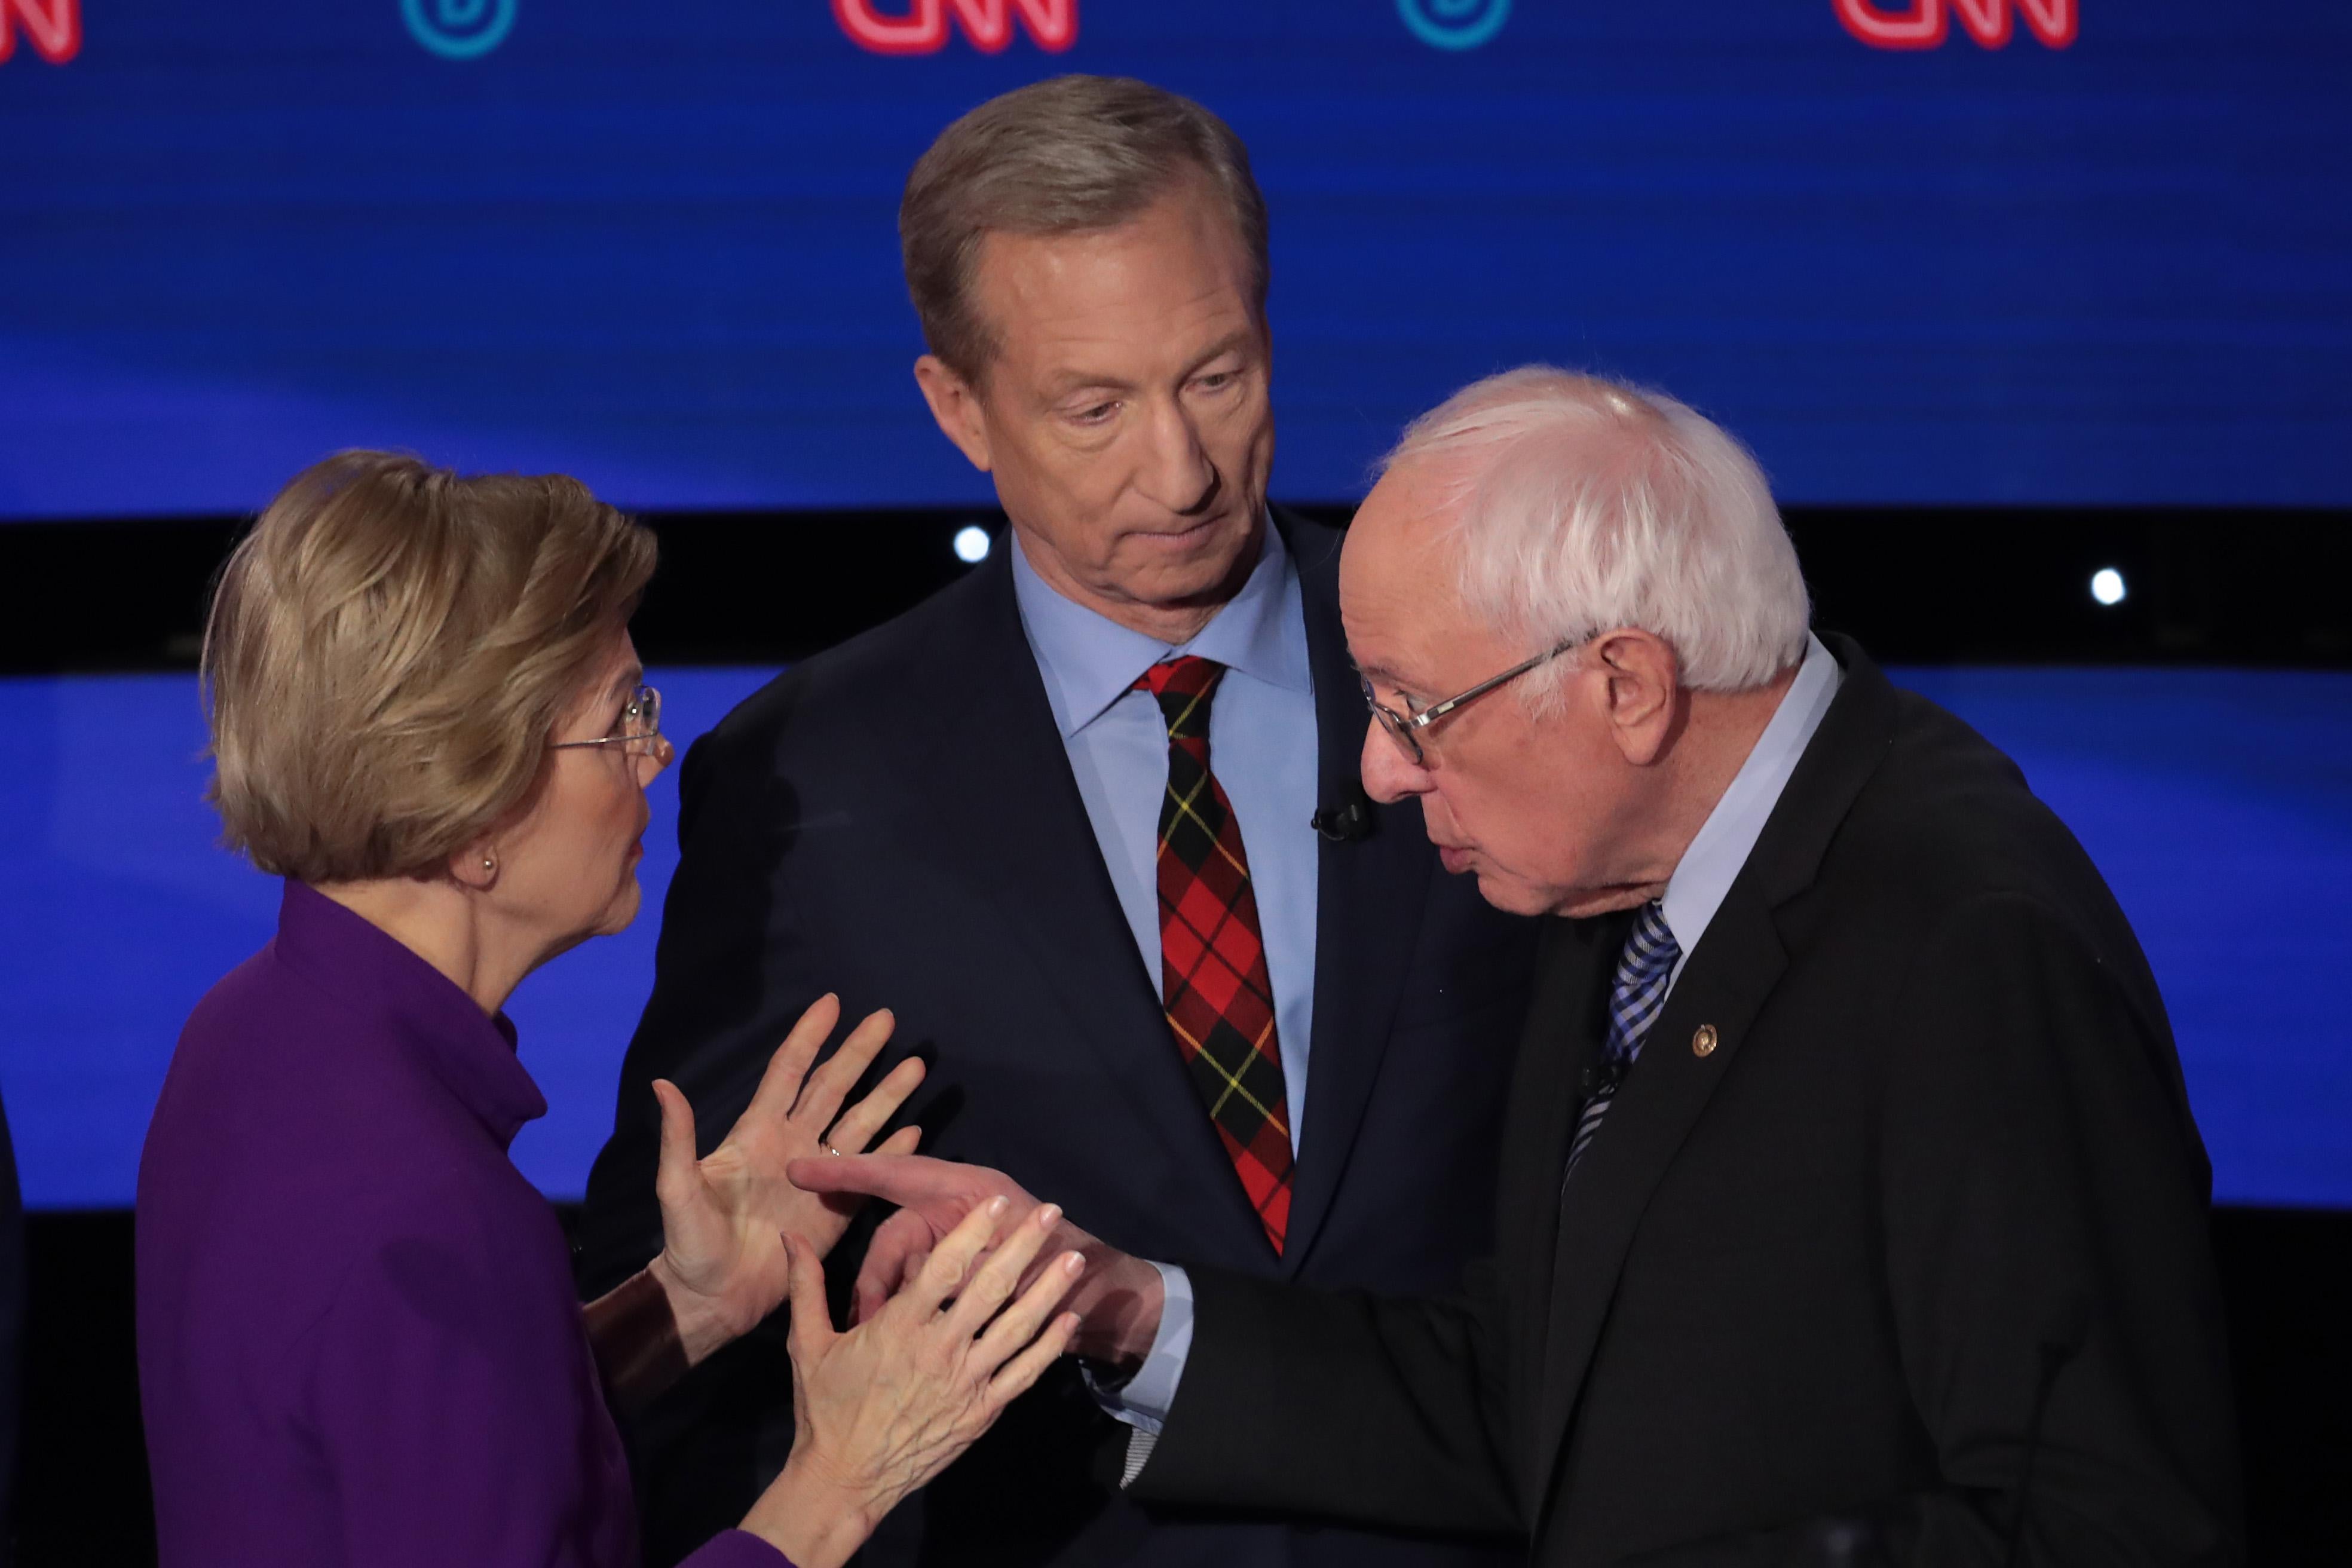 Elizabeth Warren and Bernie Sanders face each other in a heated conversation onstage as Tom Steyer looks on beside them.